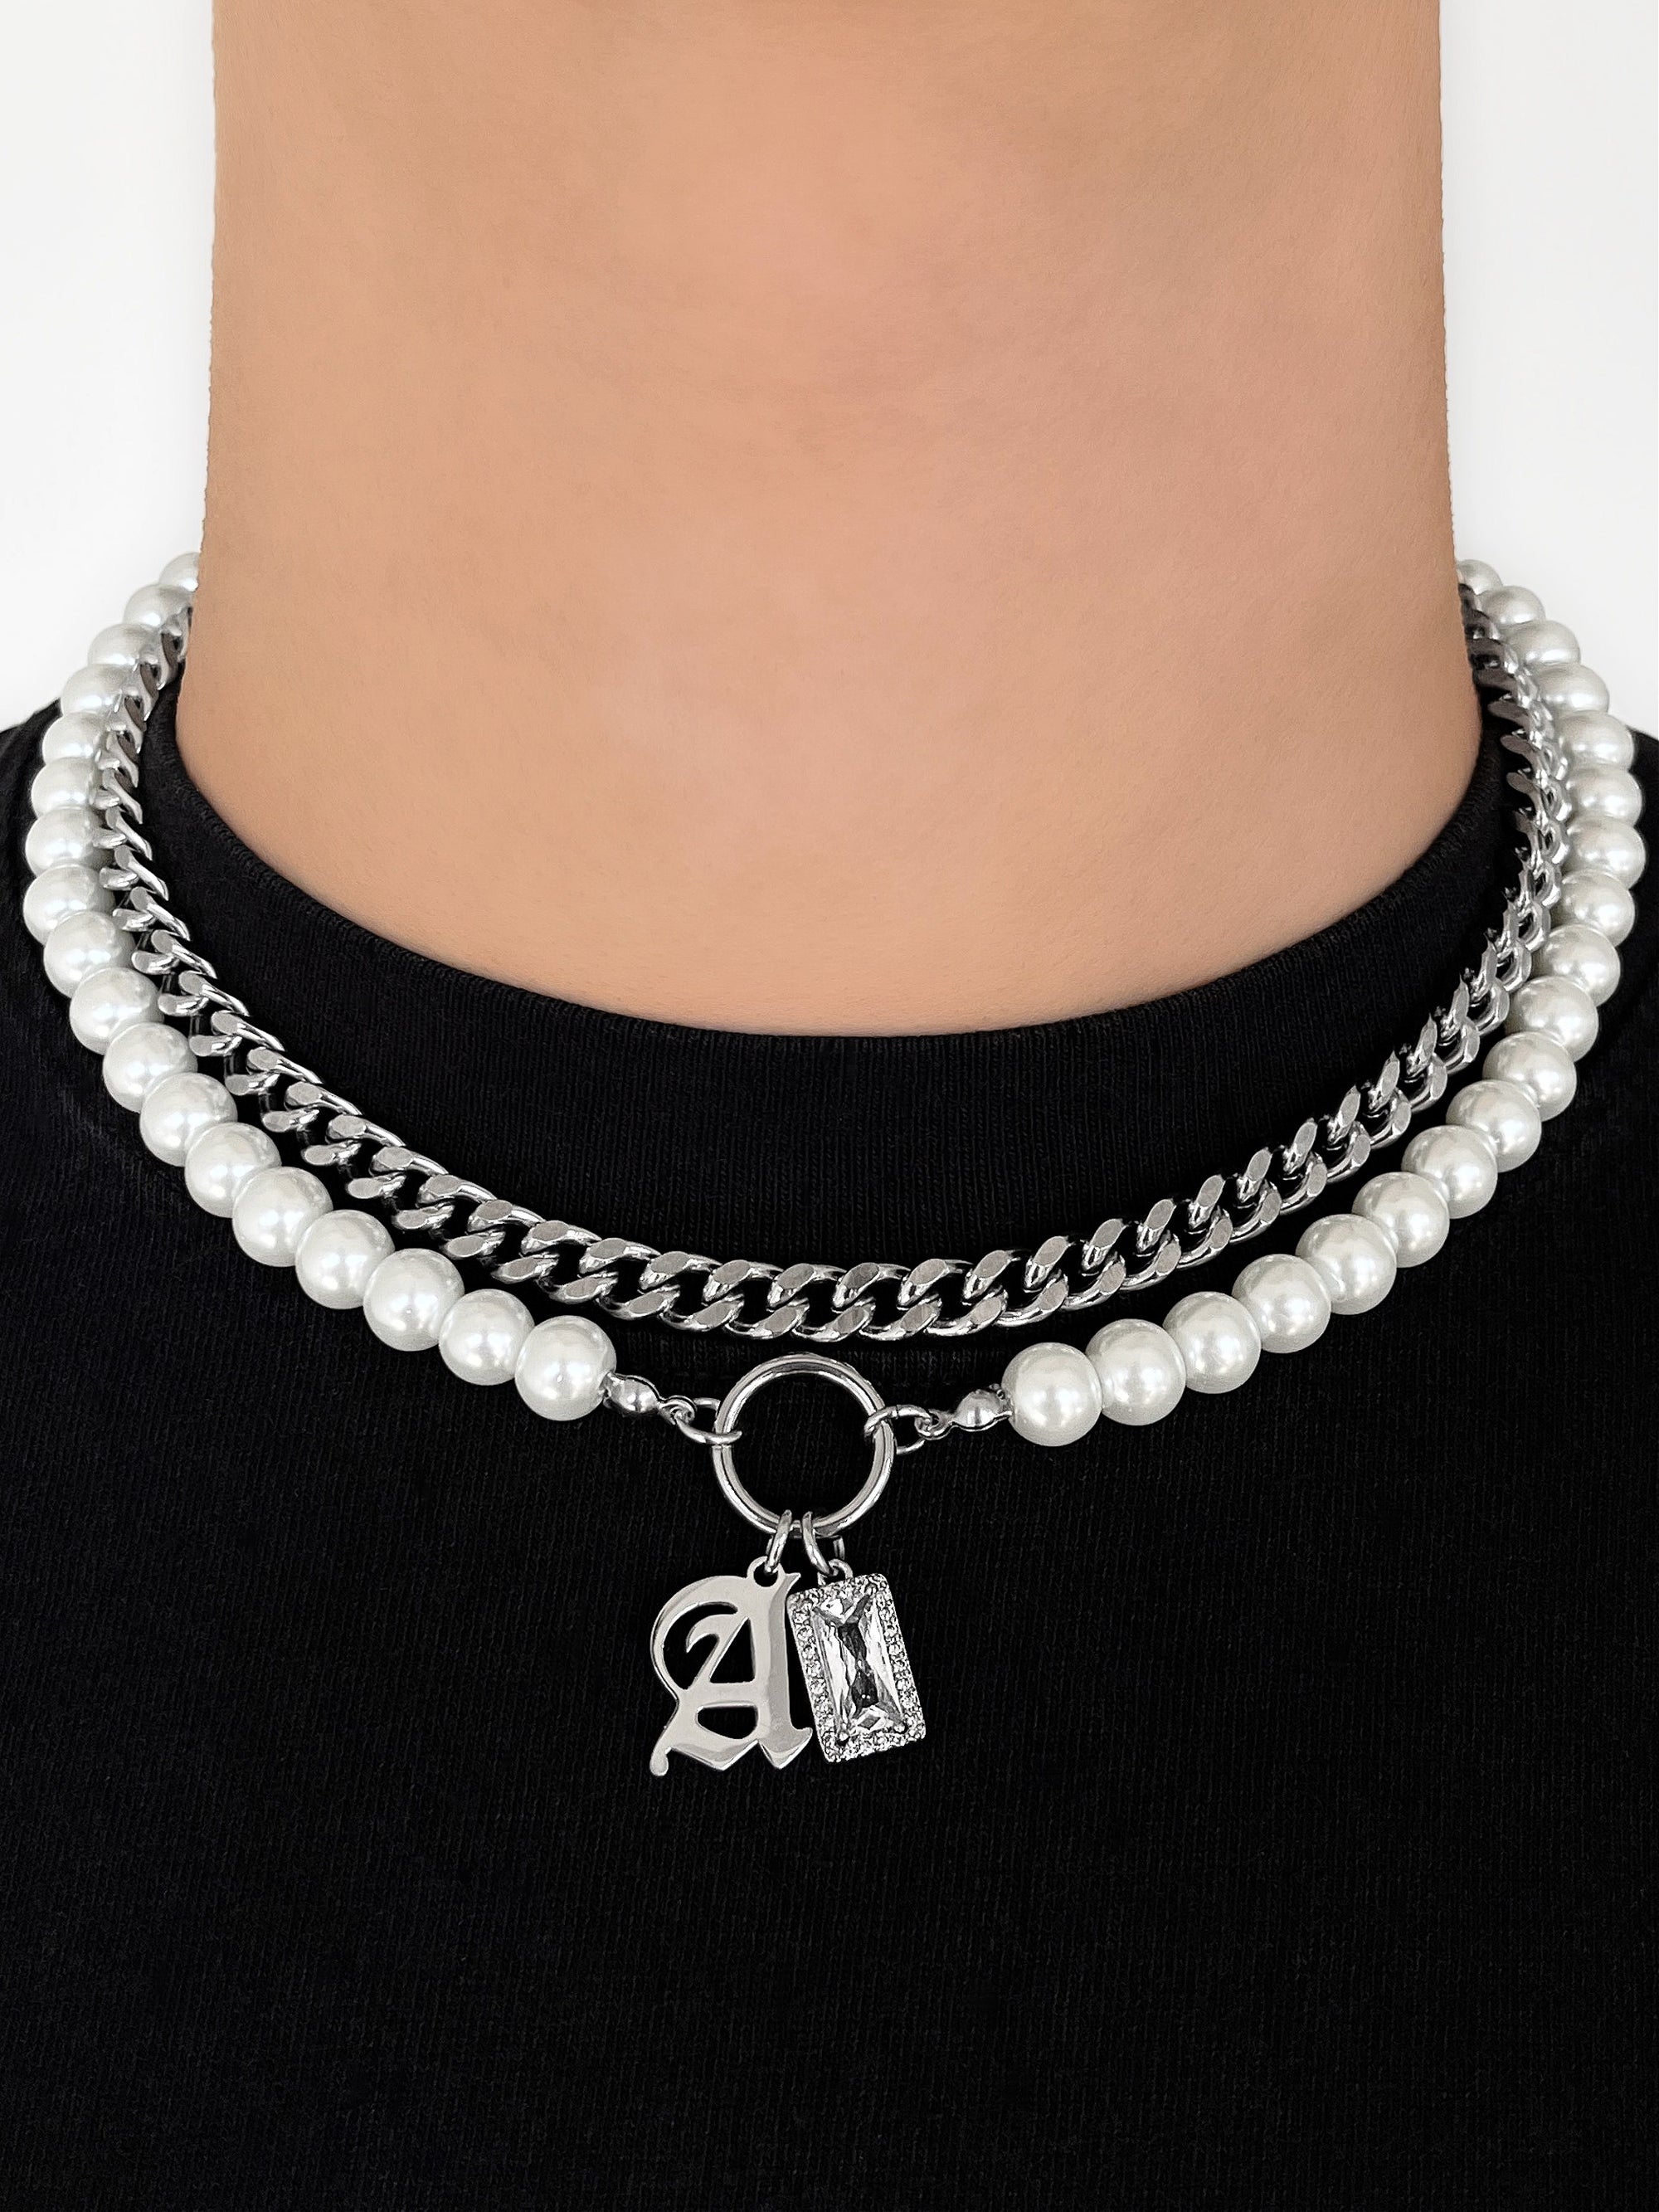 RYDER CUBAN CHAIN NECKLACE